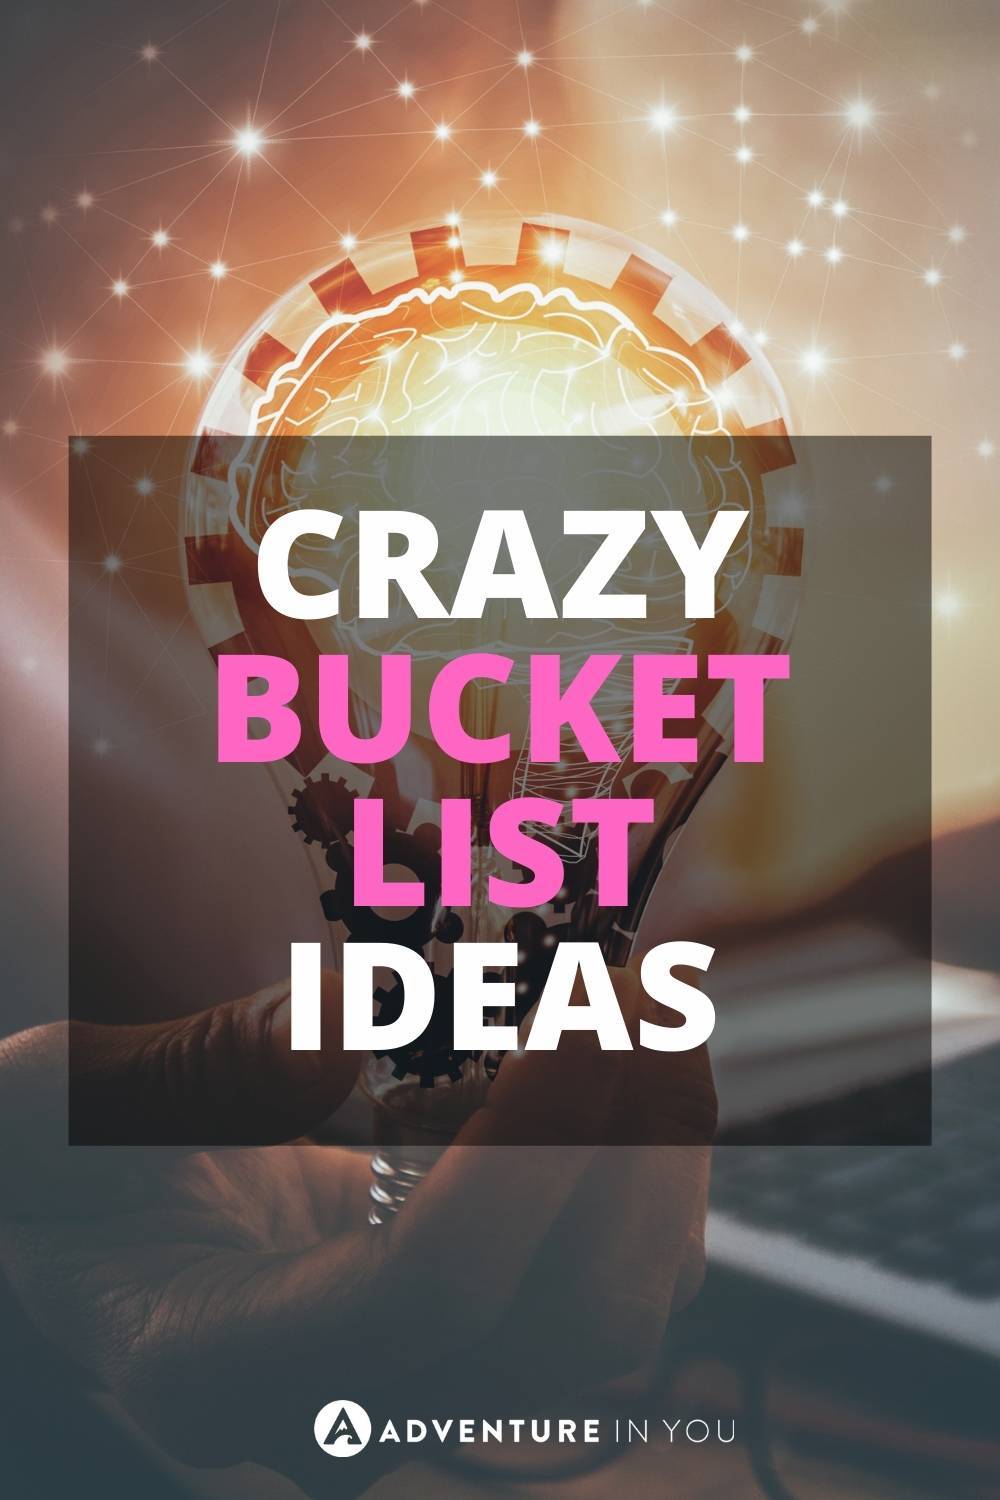 Crazy Bucket List Ideas | listed here are the crazy ideas that will help you live your life to the fullest!